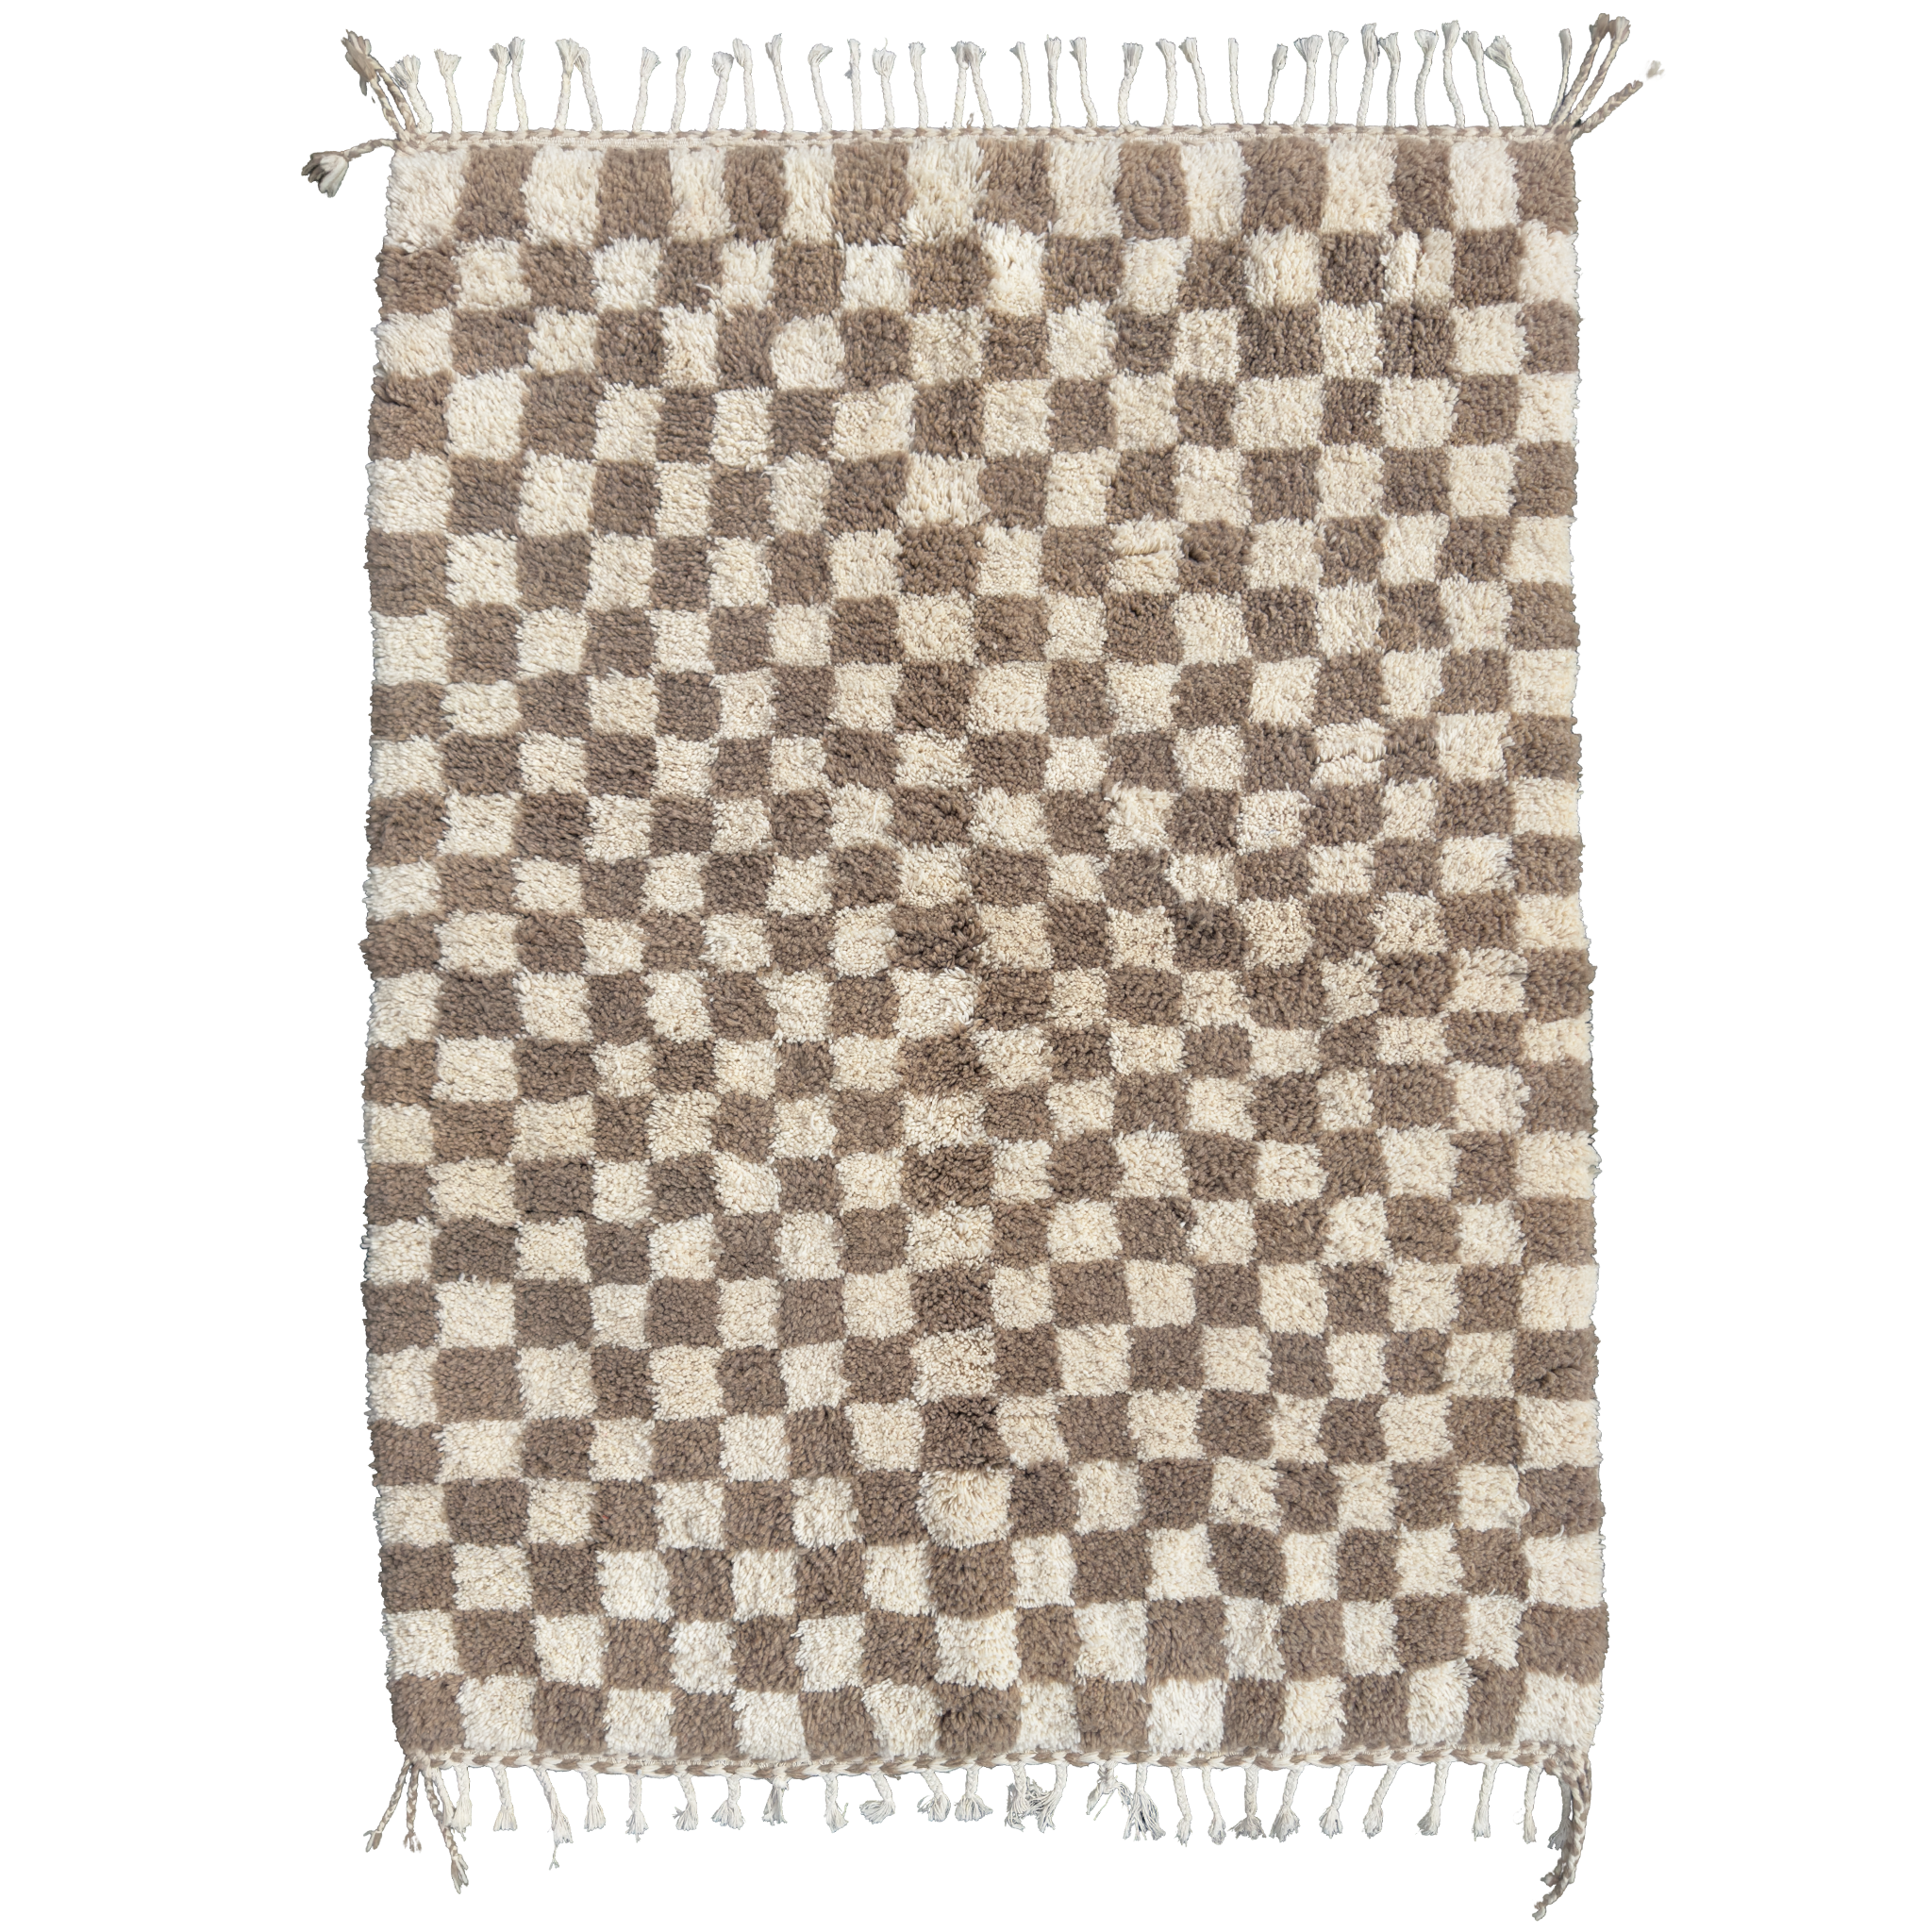 This rug combines the classic appeal of checkers with a modern twist, featuring a sophisticated color palette of cream and taupe.